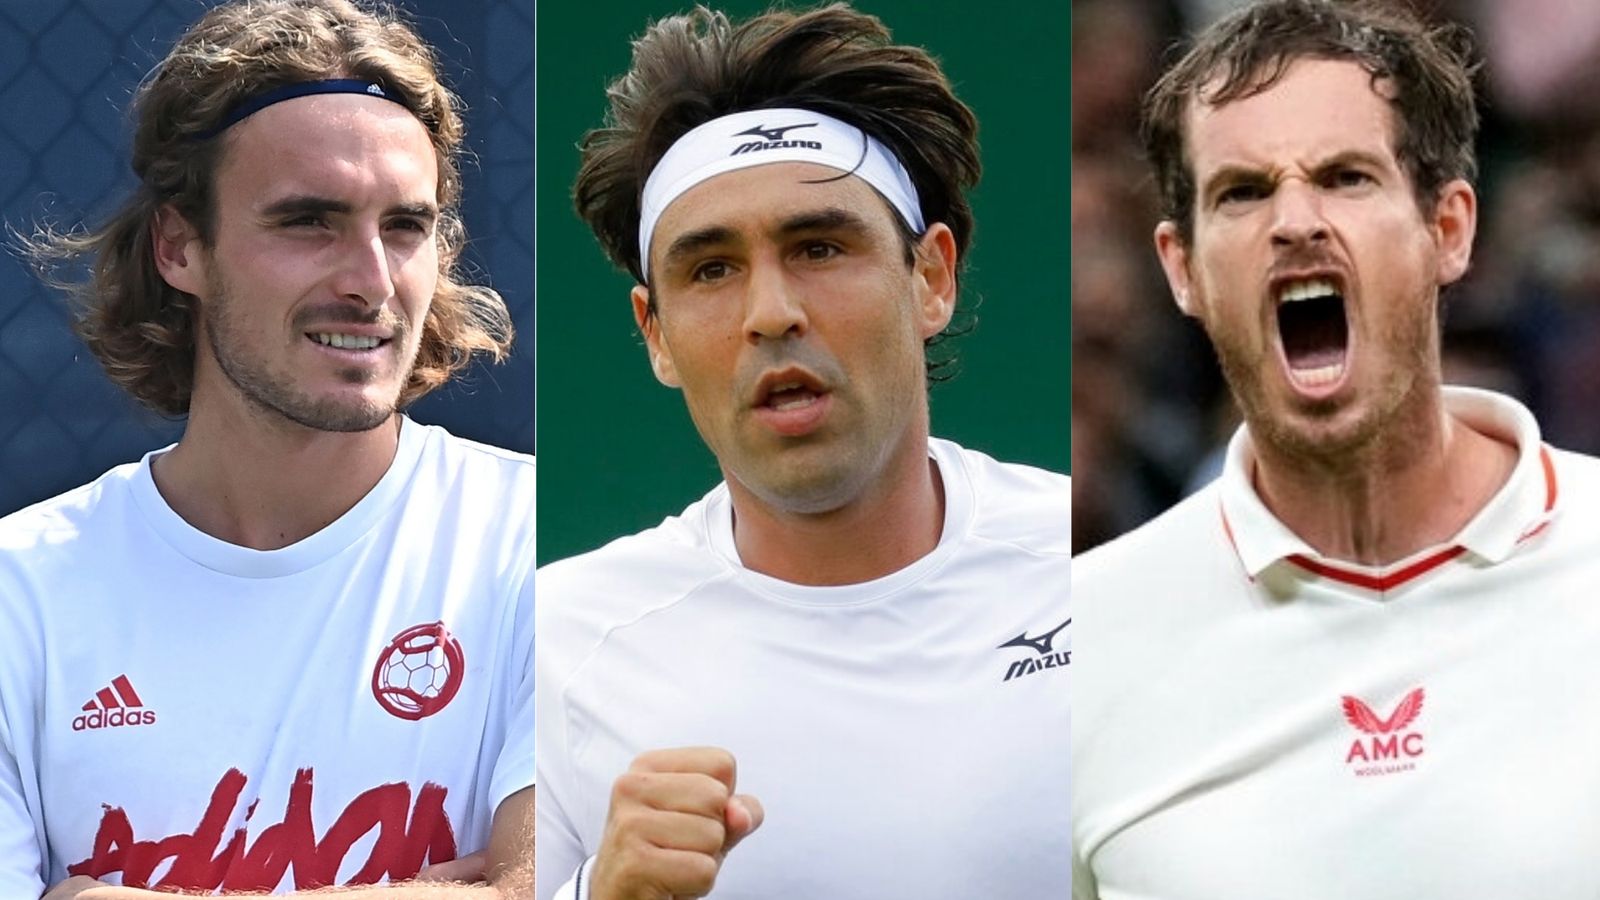 Andy Murray won’t be able to match Stefanos Tsitsipas at US Open, says Marcos Baghdatis